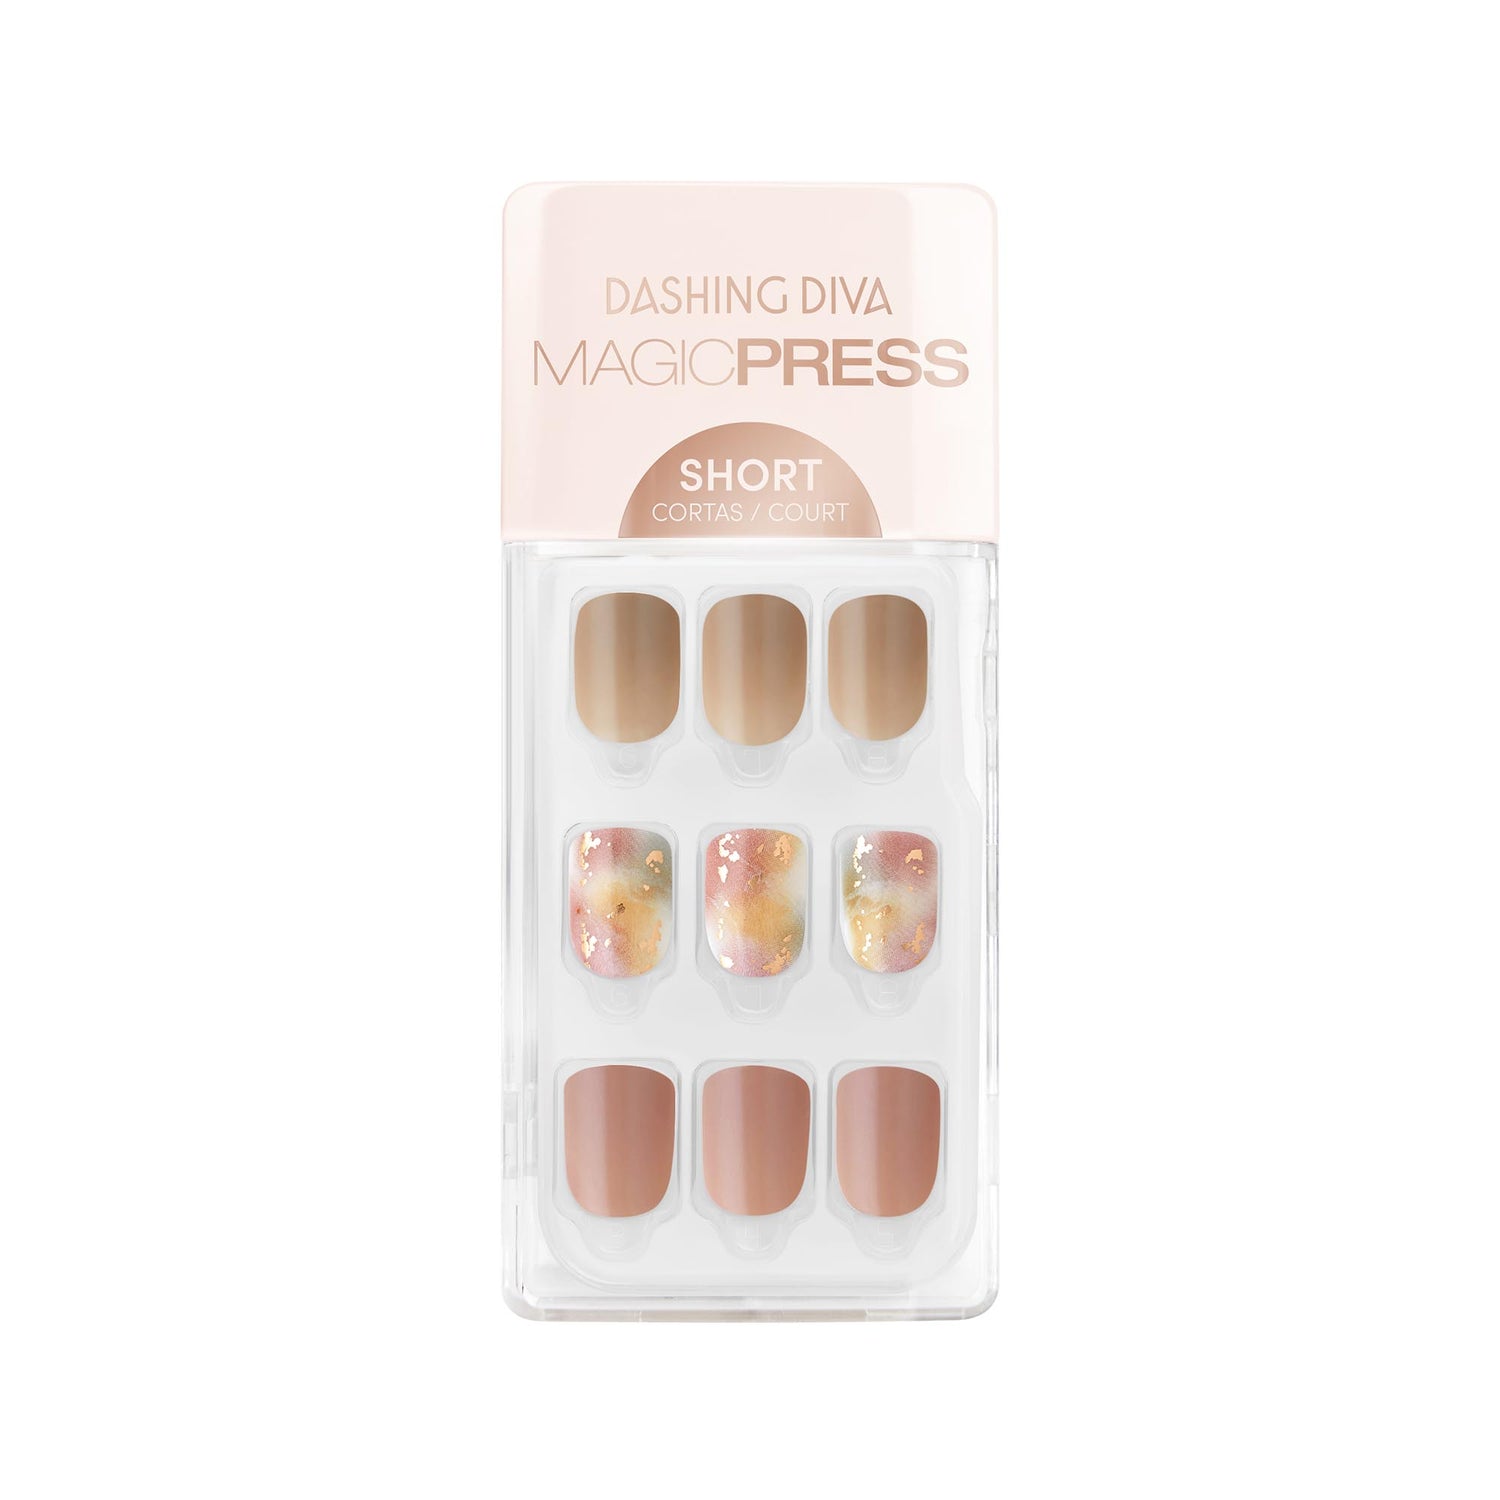 Dashing Diva MAGIC PRESS short, square neutral brown press on gel nails with multicolor tie dye accents & gold foil.